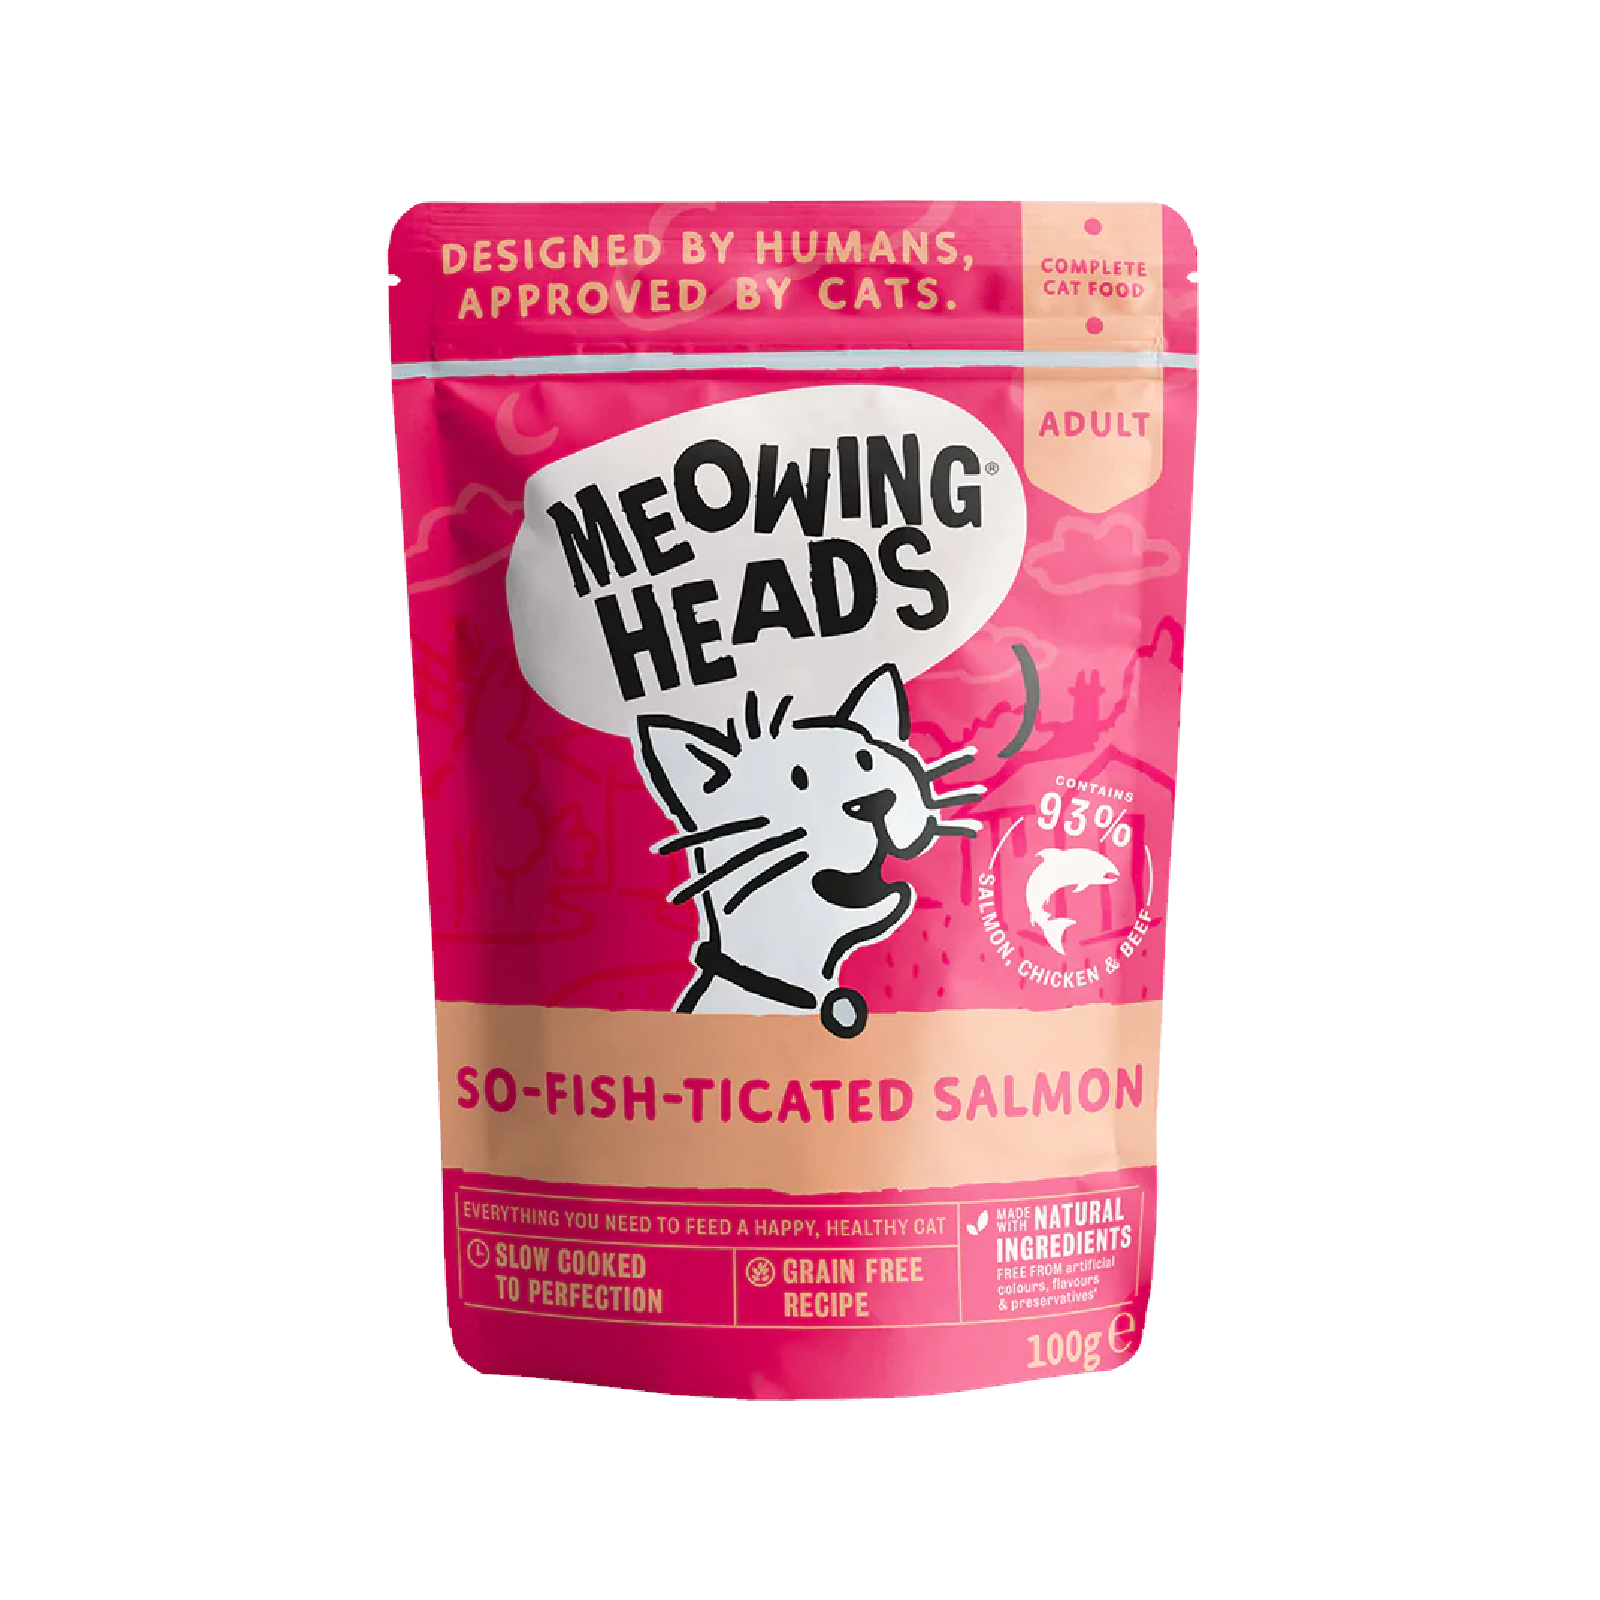 Meowing Heads so-fish-ticated salmon Pouches